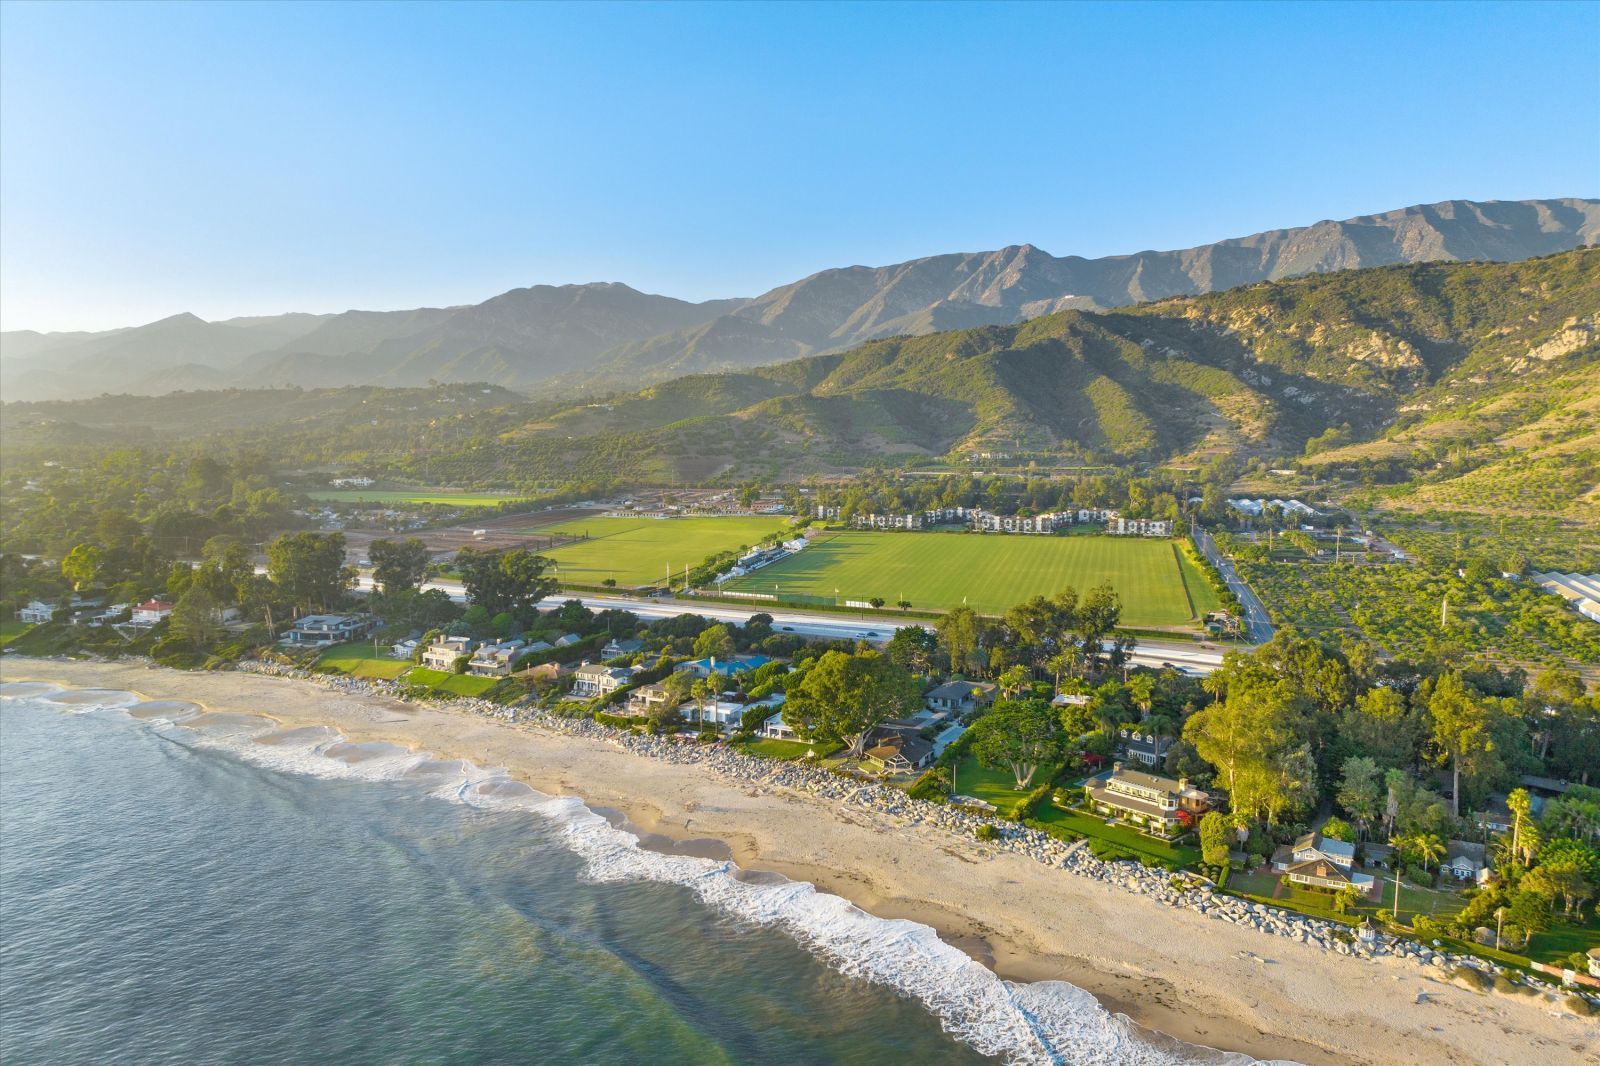 Drone photo over the Pacific looking toward land and the Santa Barbara Polo Field and mountains.